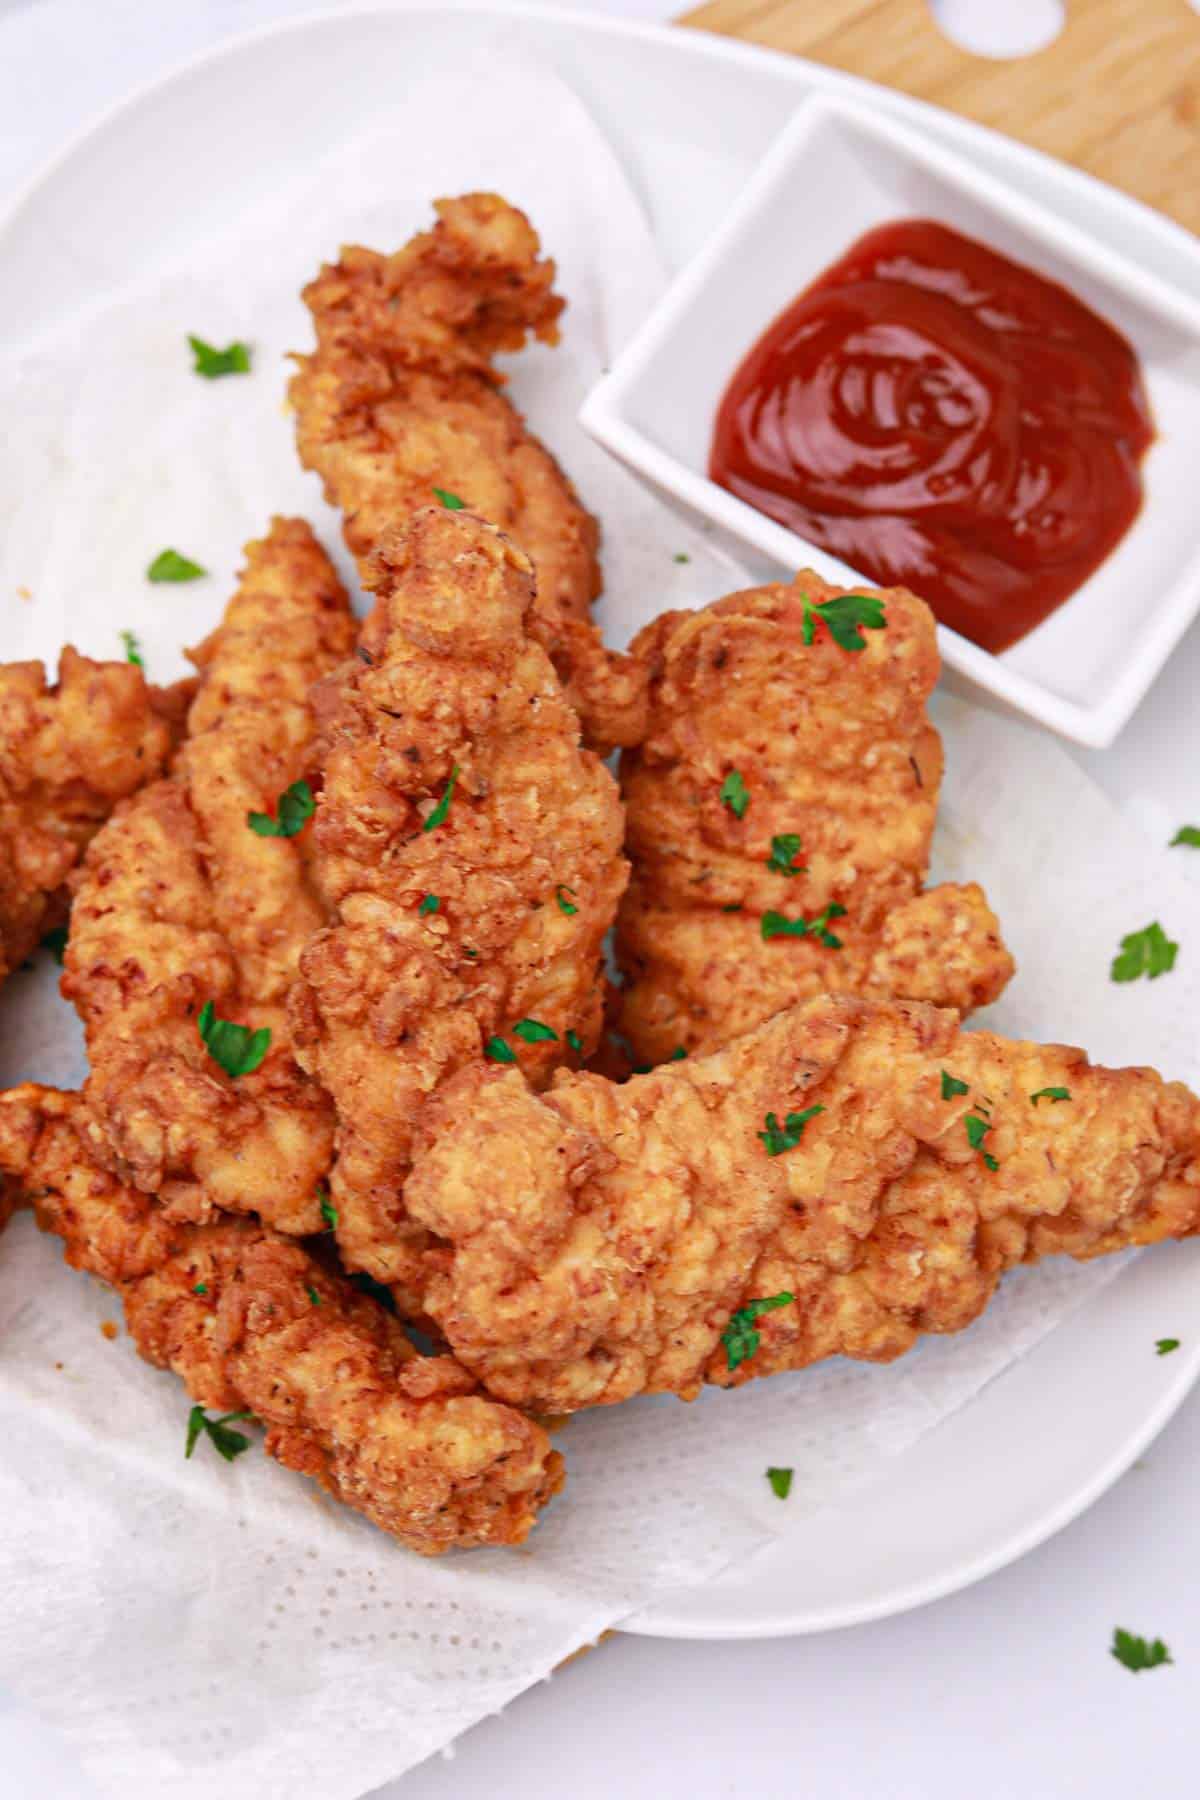 the fried chicken tenders on a plate with ketchup dip.